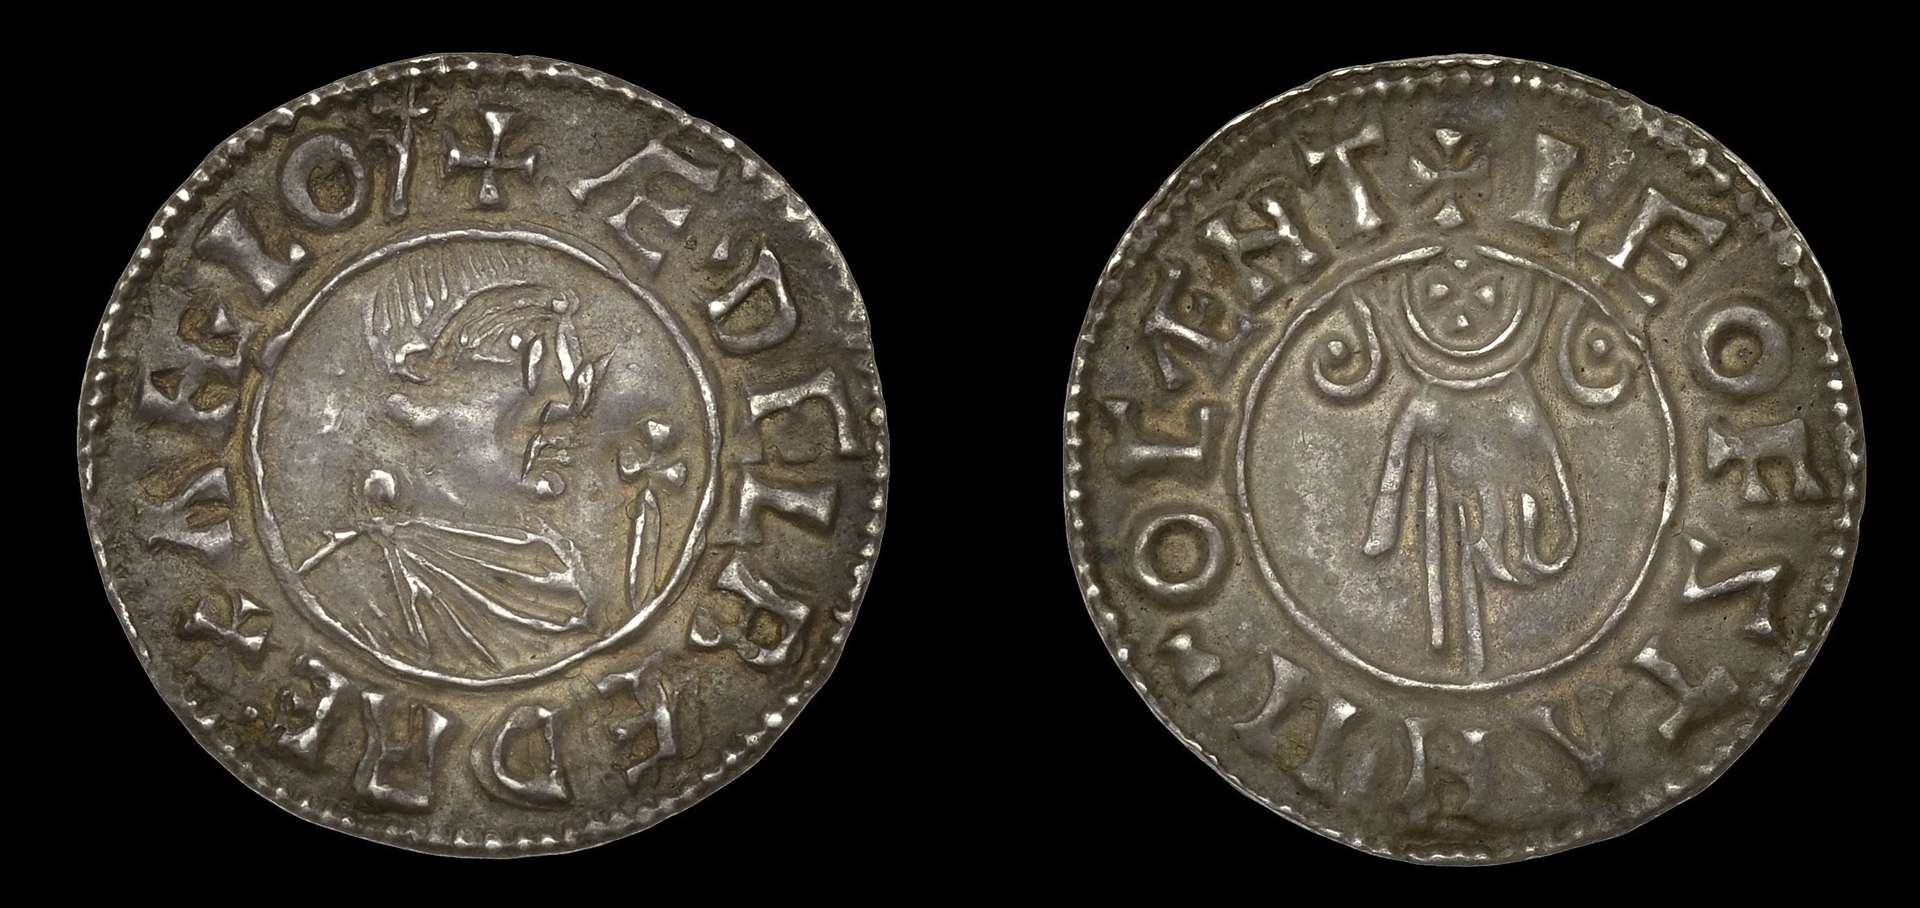 A penny from the reign of Æthelred II has sold for more than £13,000. Picture: Dix Noonan Webb